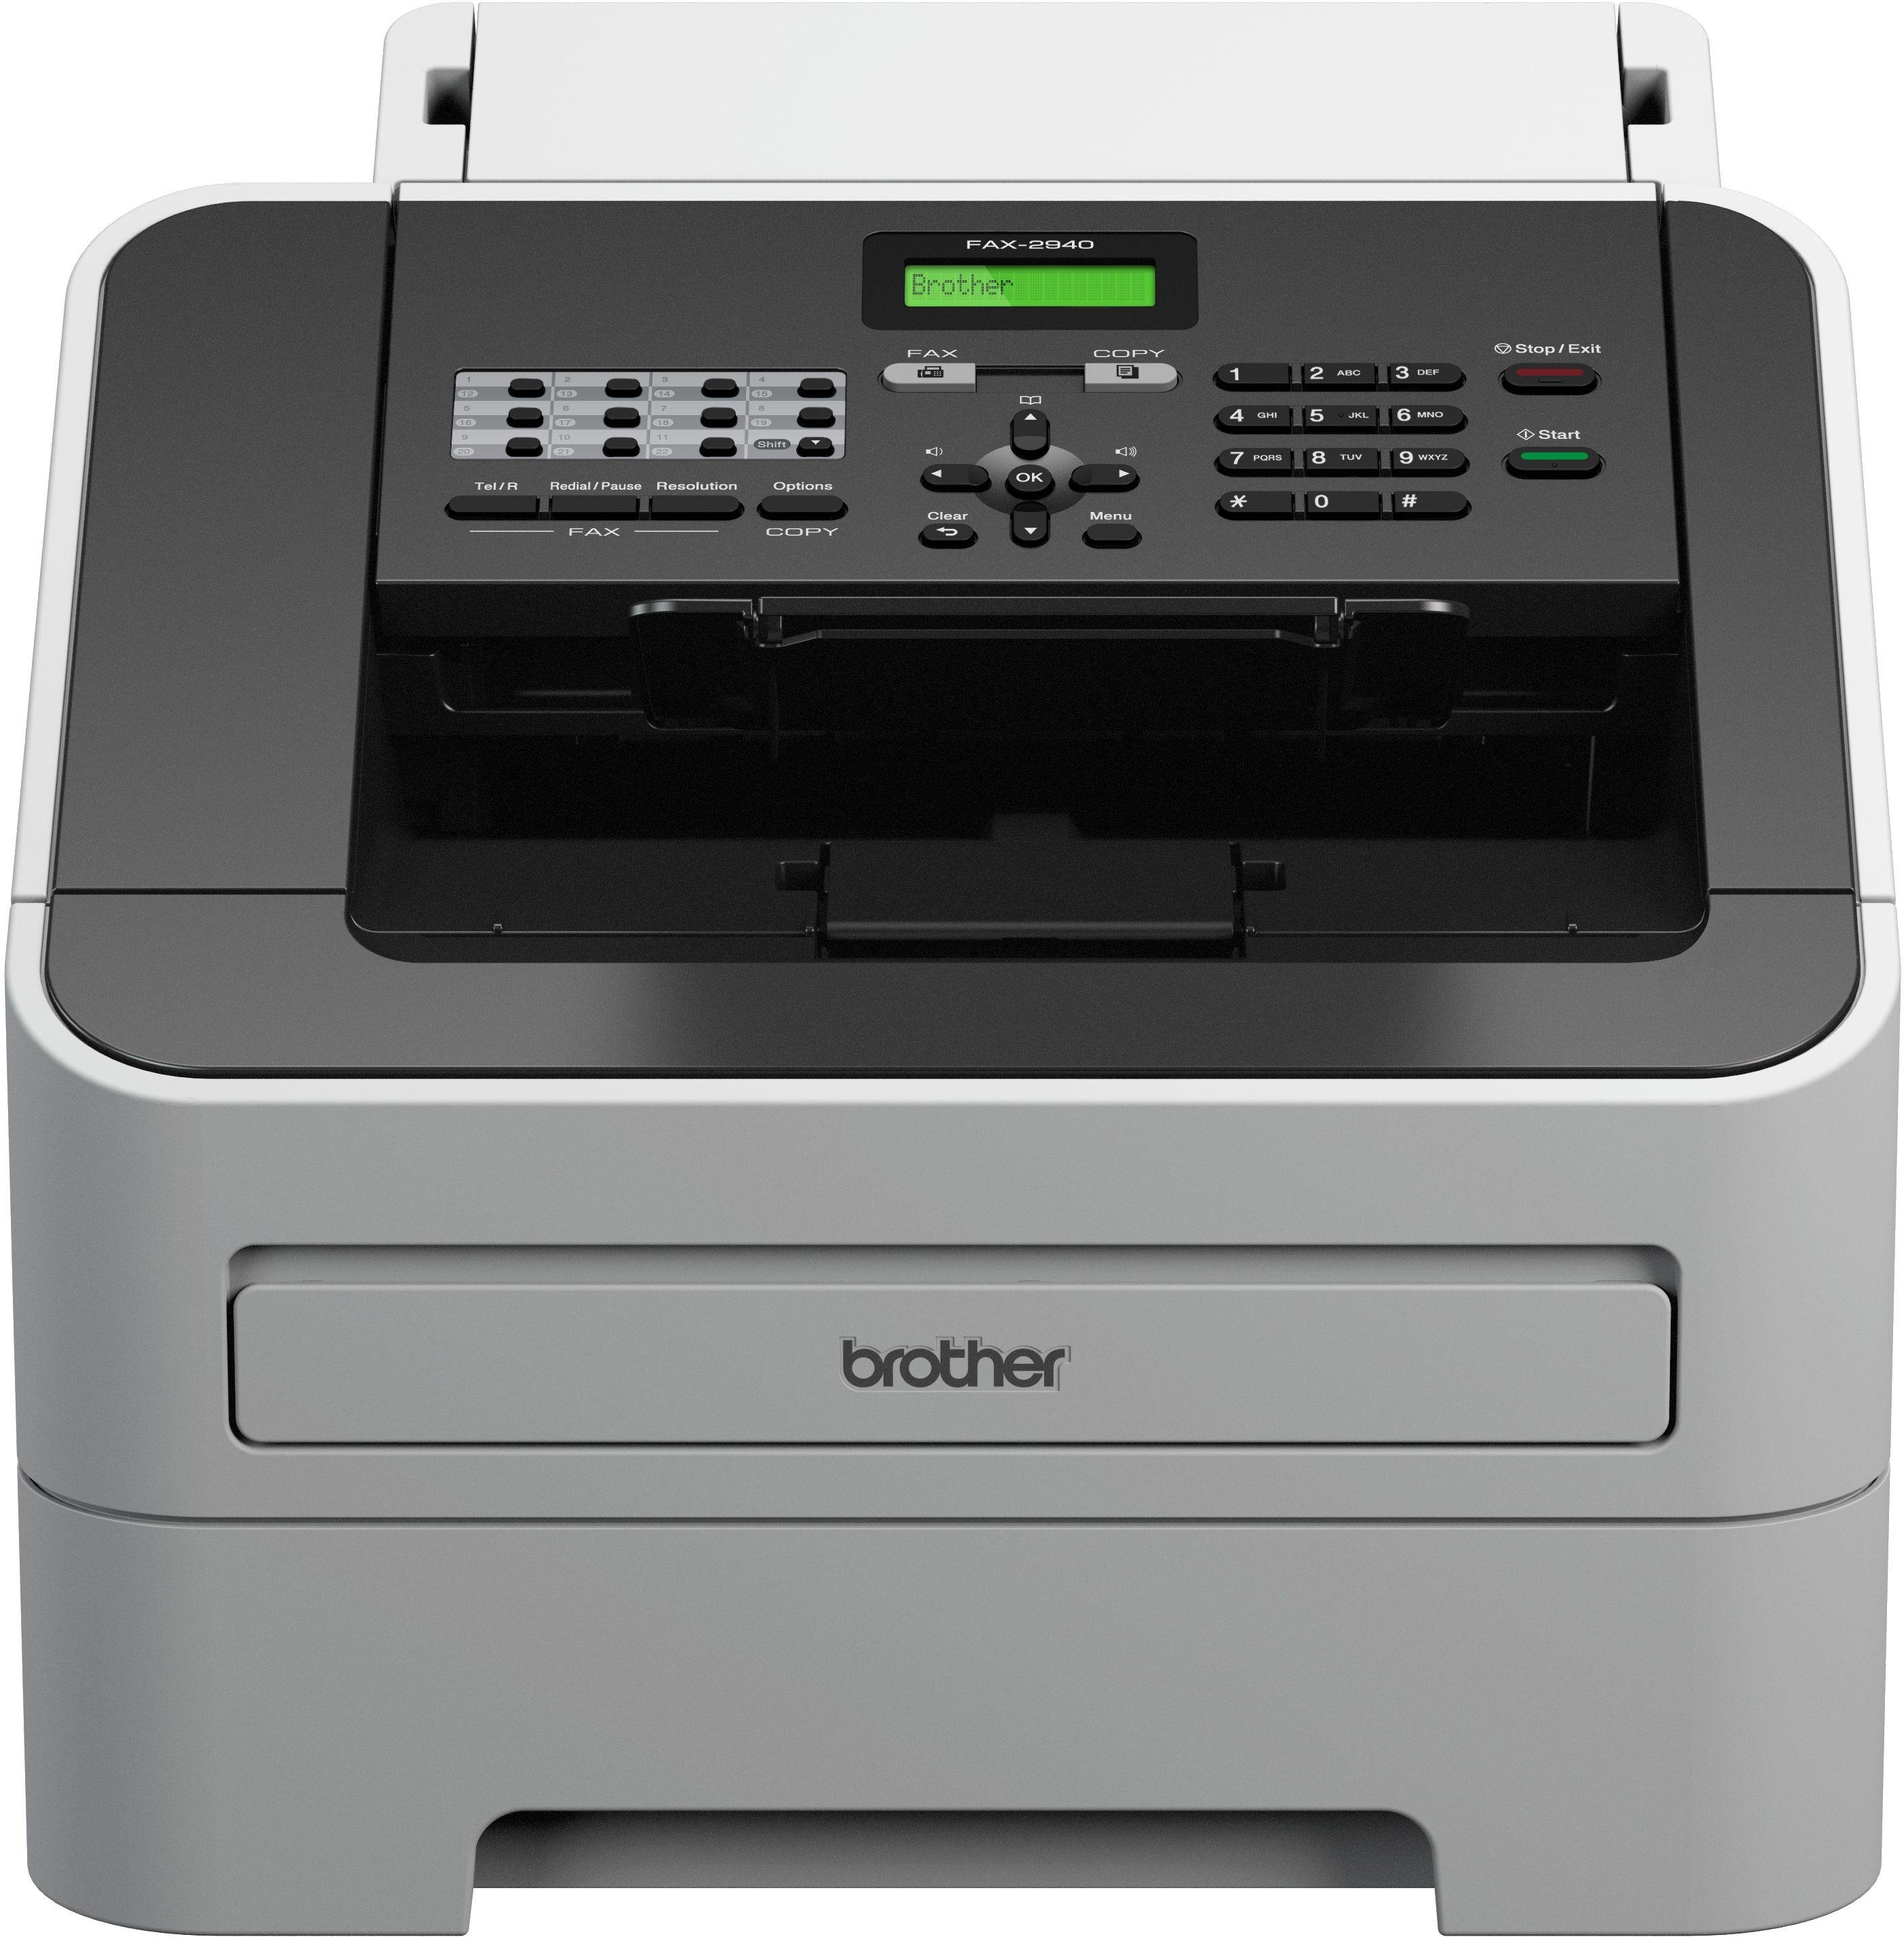 Brother FAX2940 Mono Laser Fax. Review